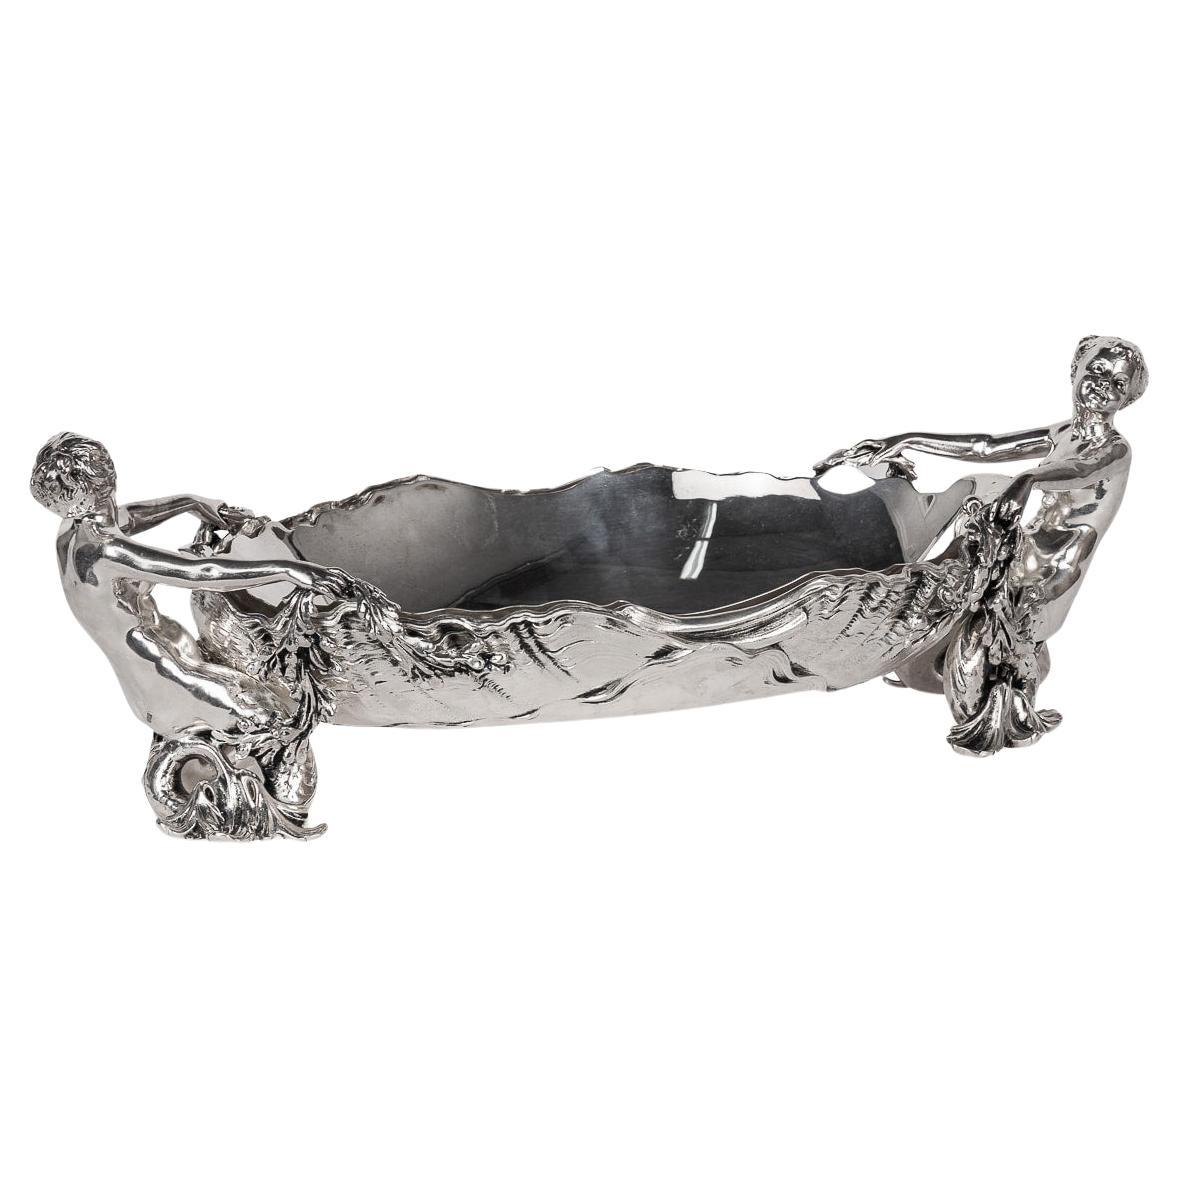 Antique 19th Century French Silver Plated Figural Centrepiece, Christofle c.1880 For Sale